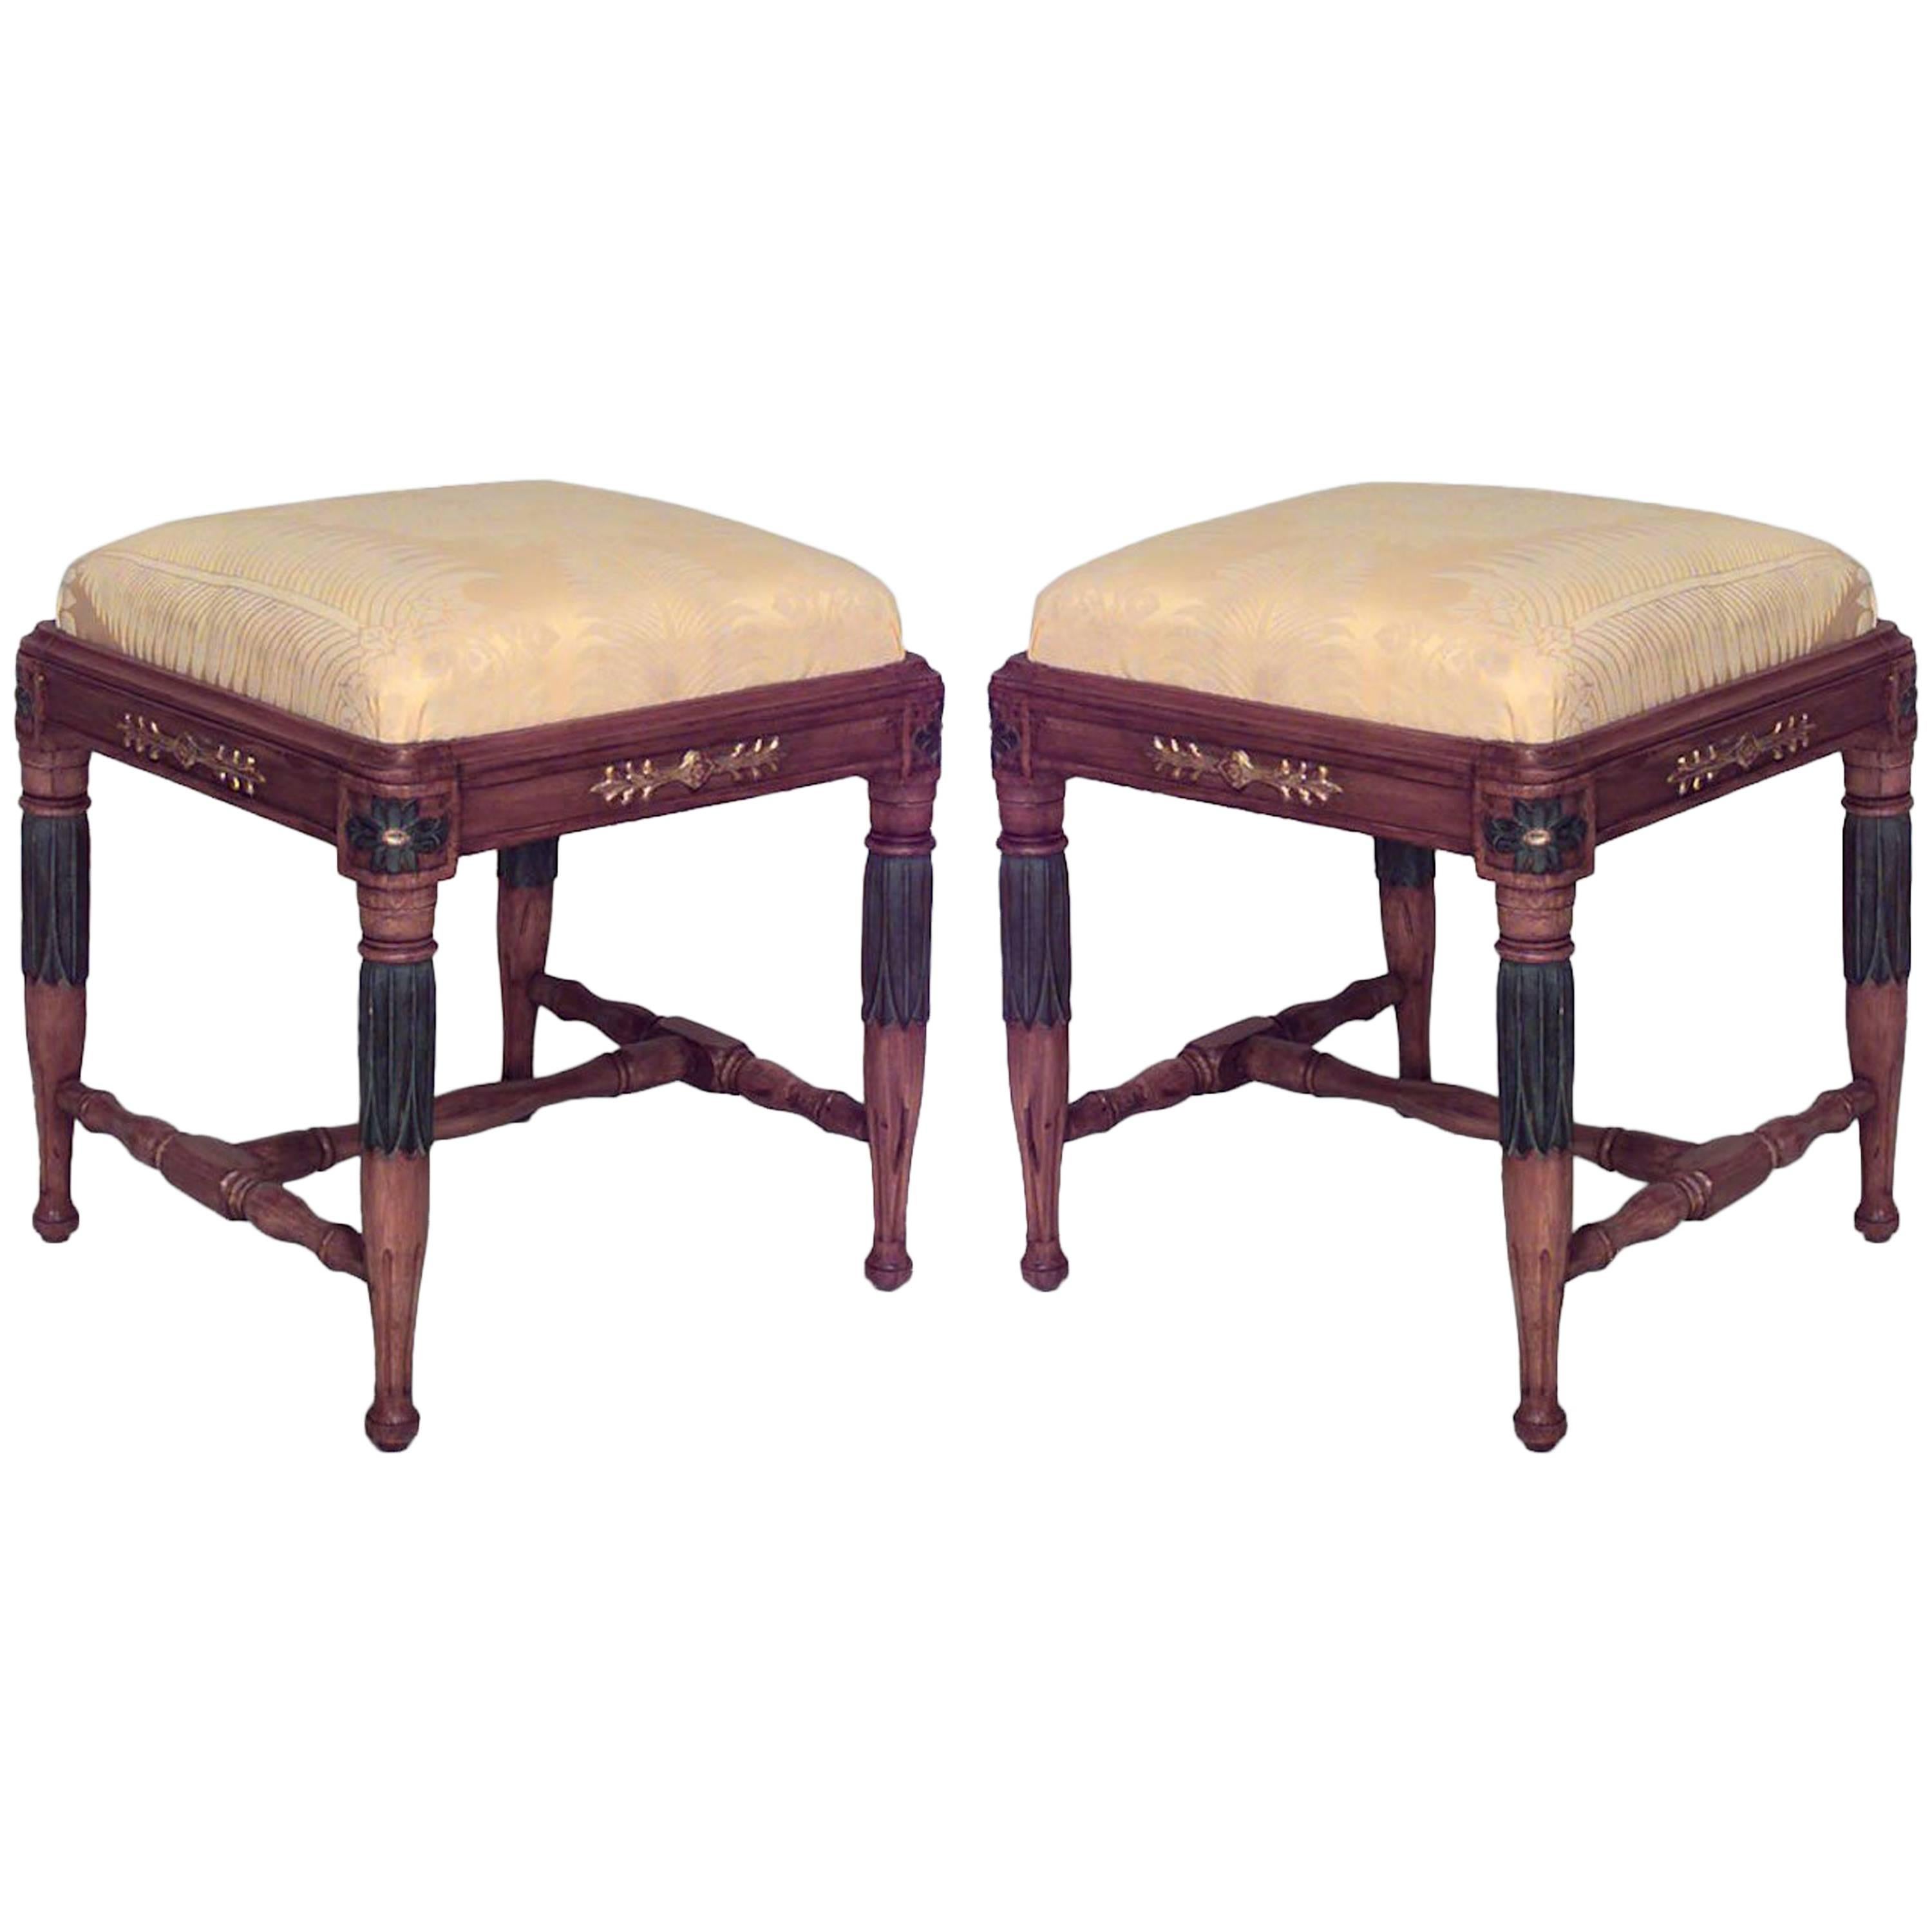 2 Swedish Neoclassic Birch and Silk Stools For Sale